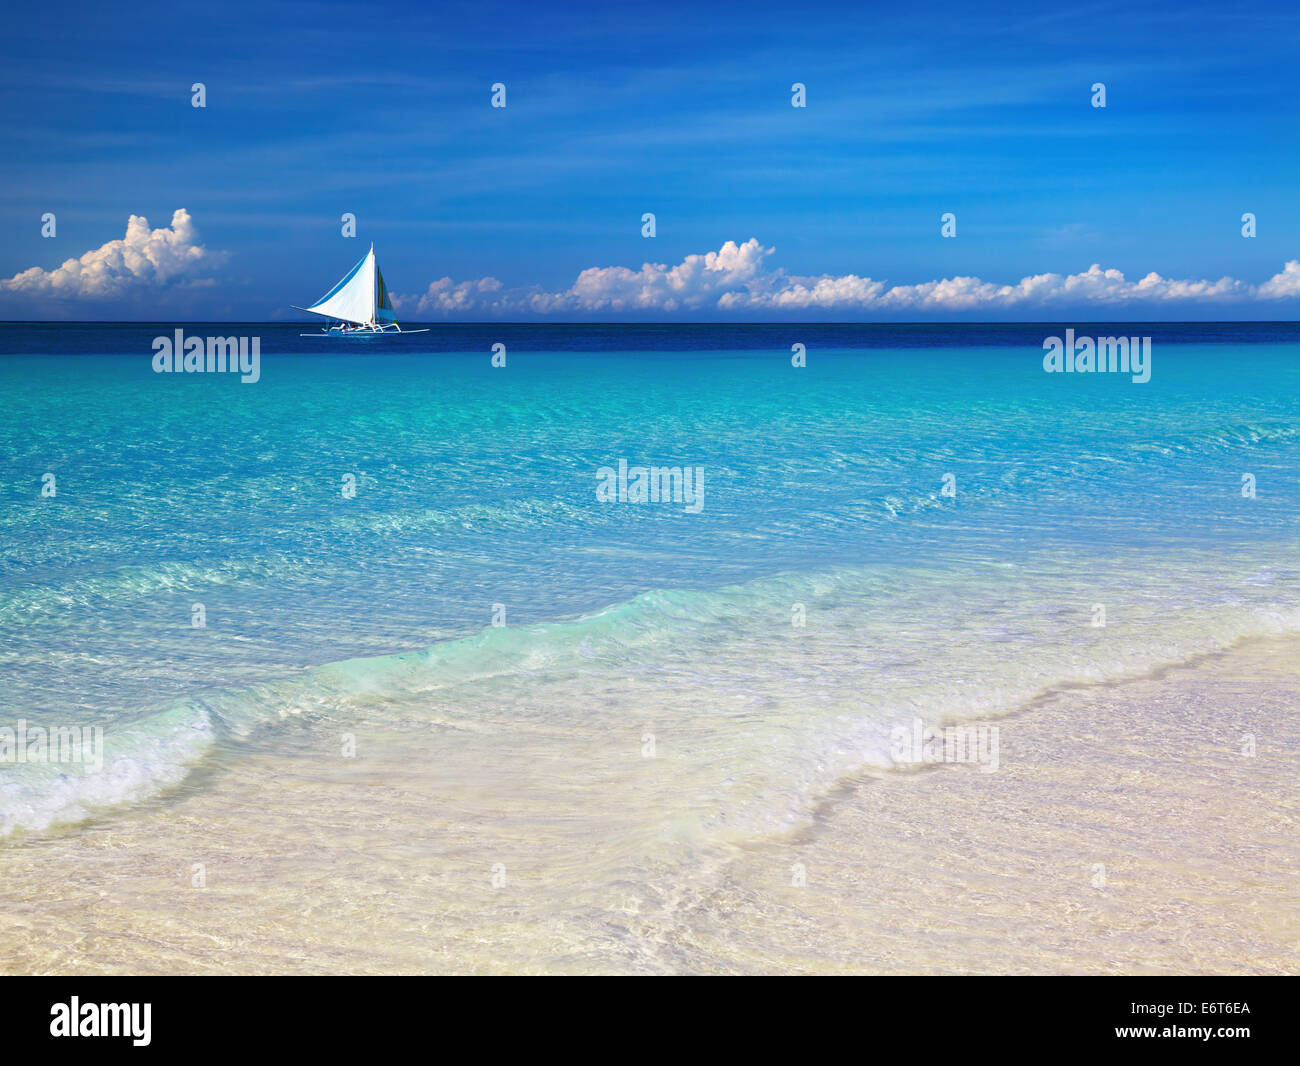 Tropical beach, Boracay Island, Philippines Banque D'Images